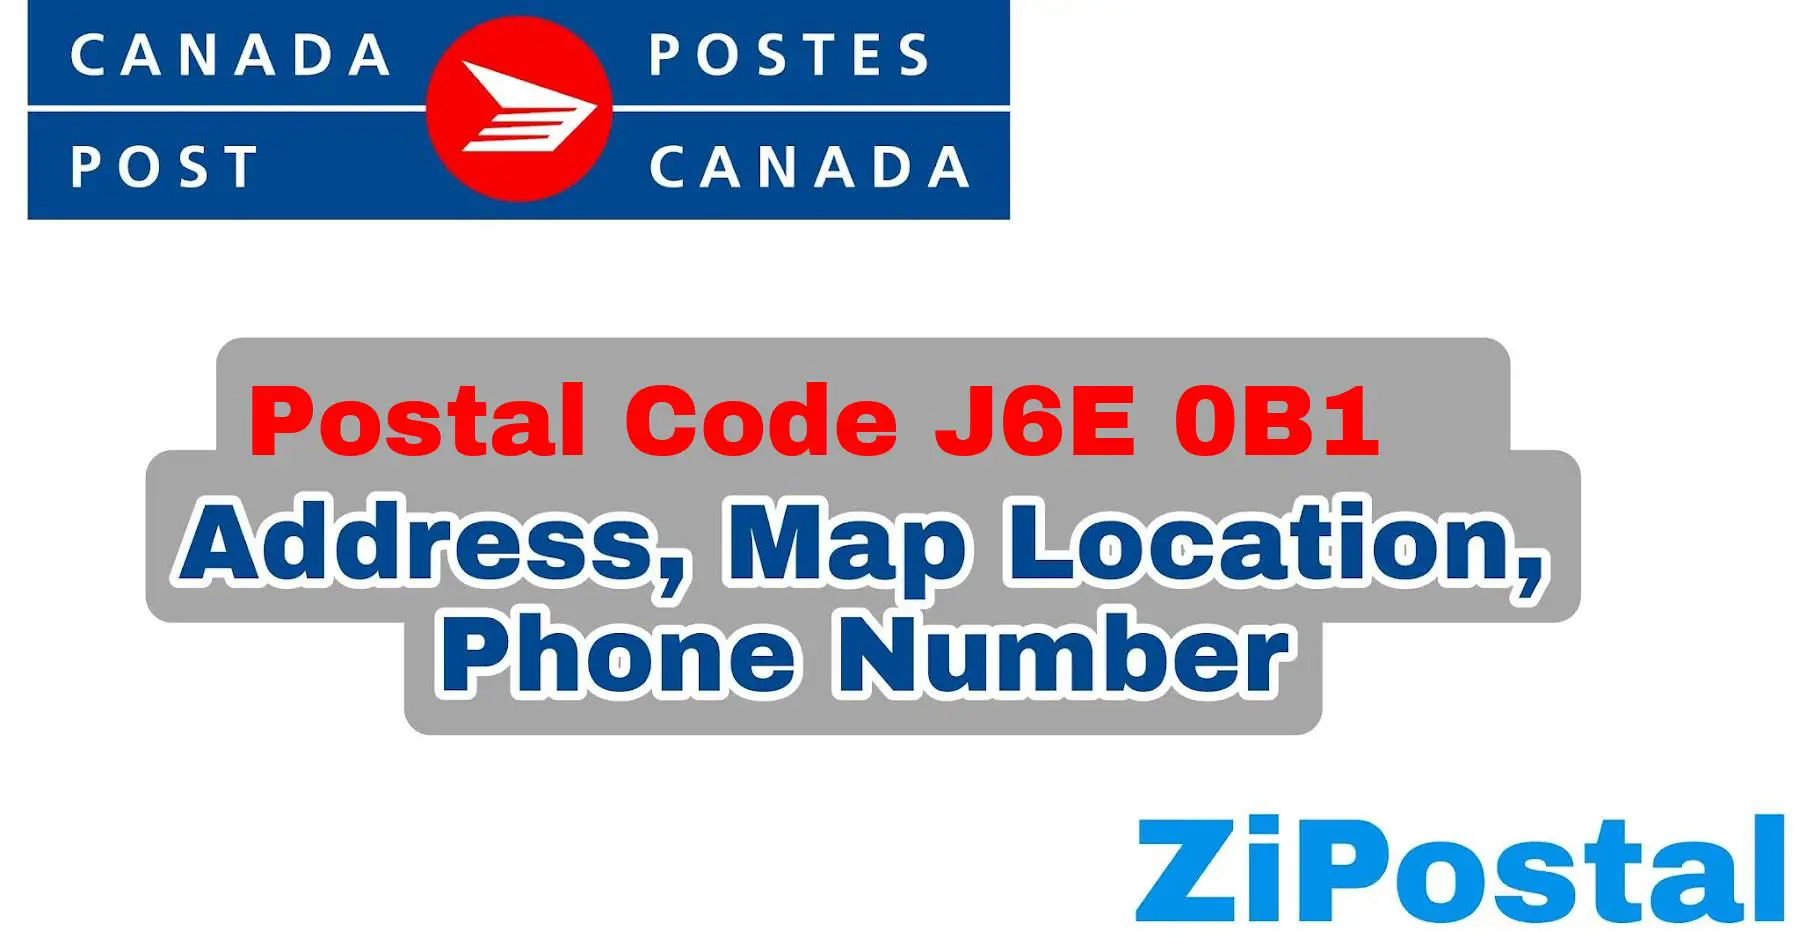 Postal Code J6E 0B1 Address Map Location and Phone Number